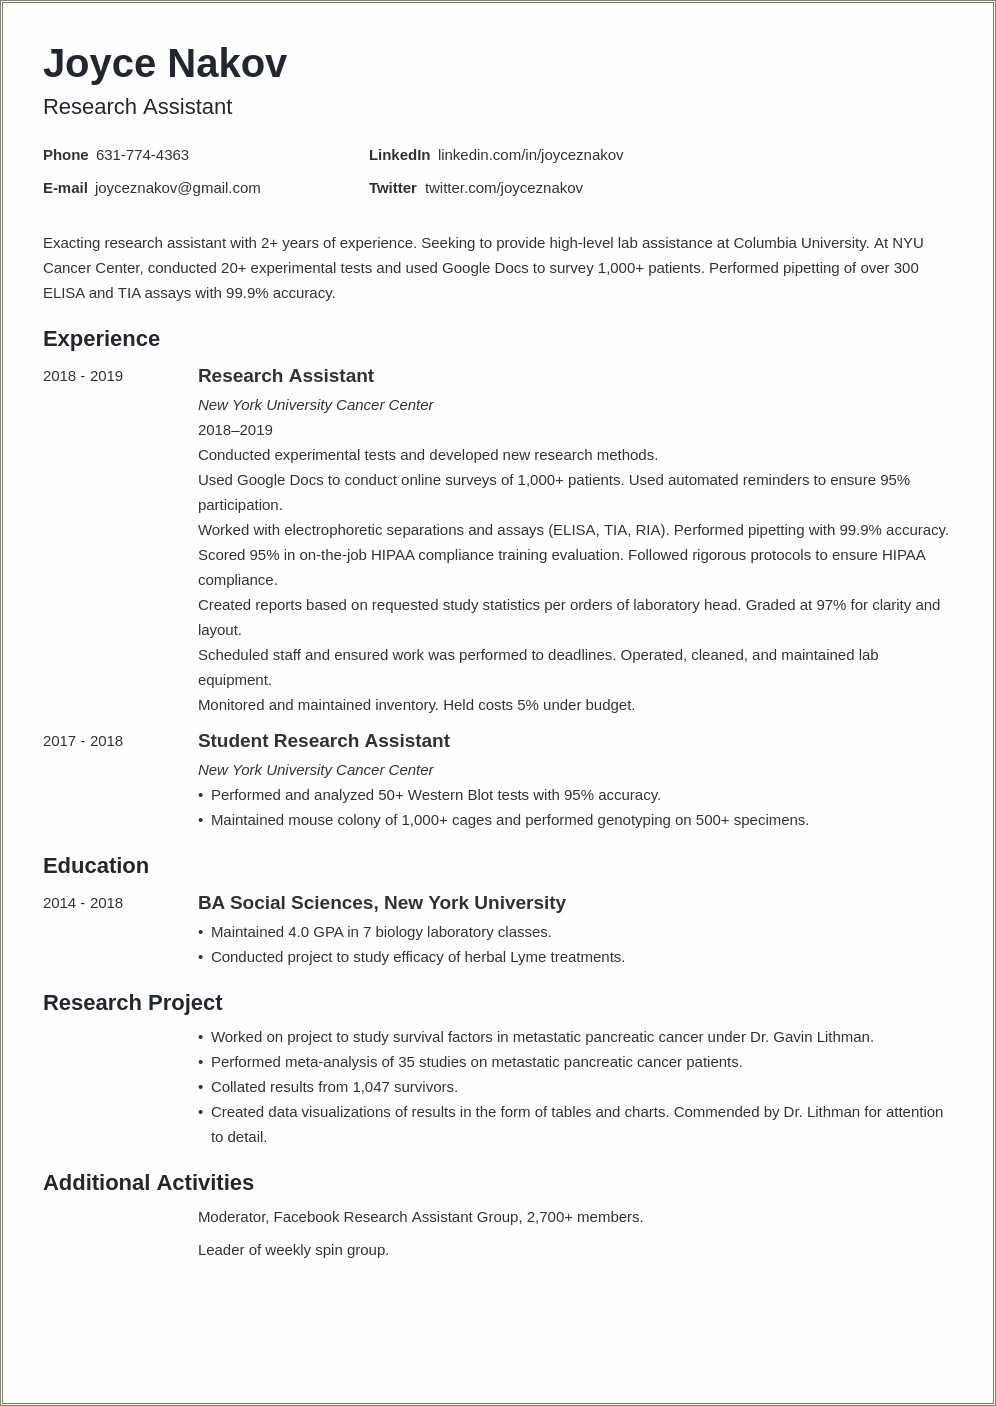 Sample Resume For Undergraduate Research Assistant